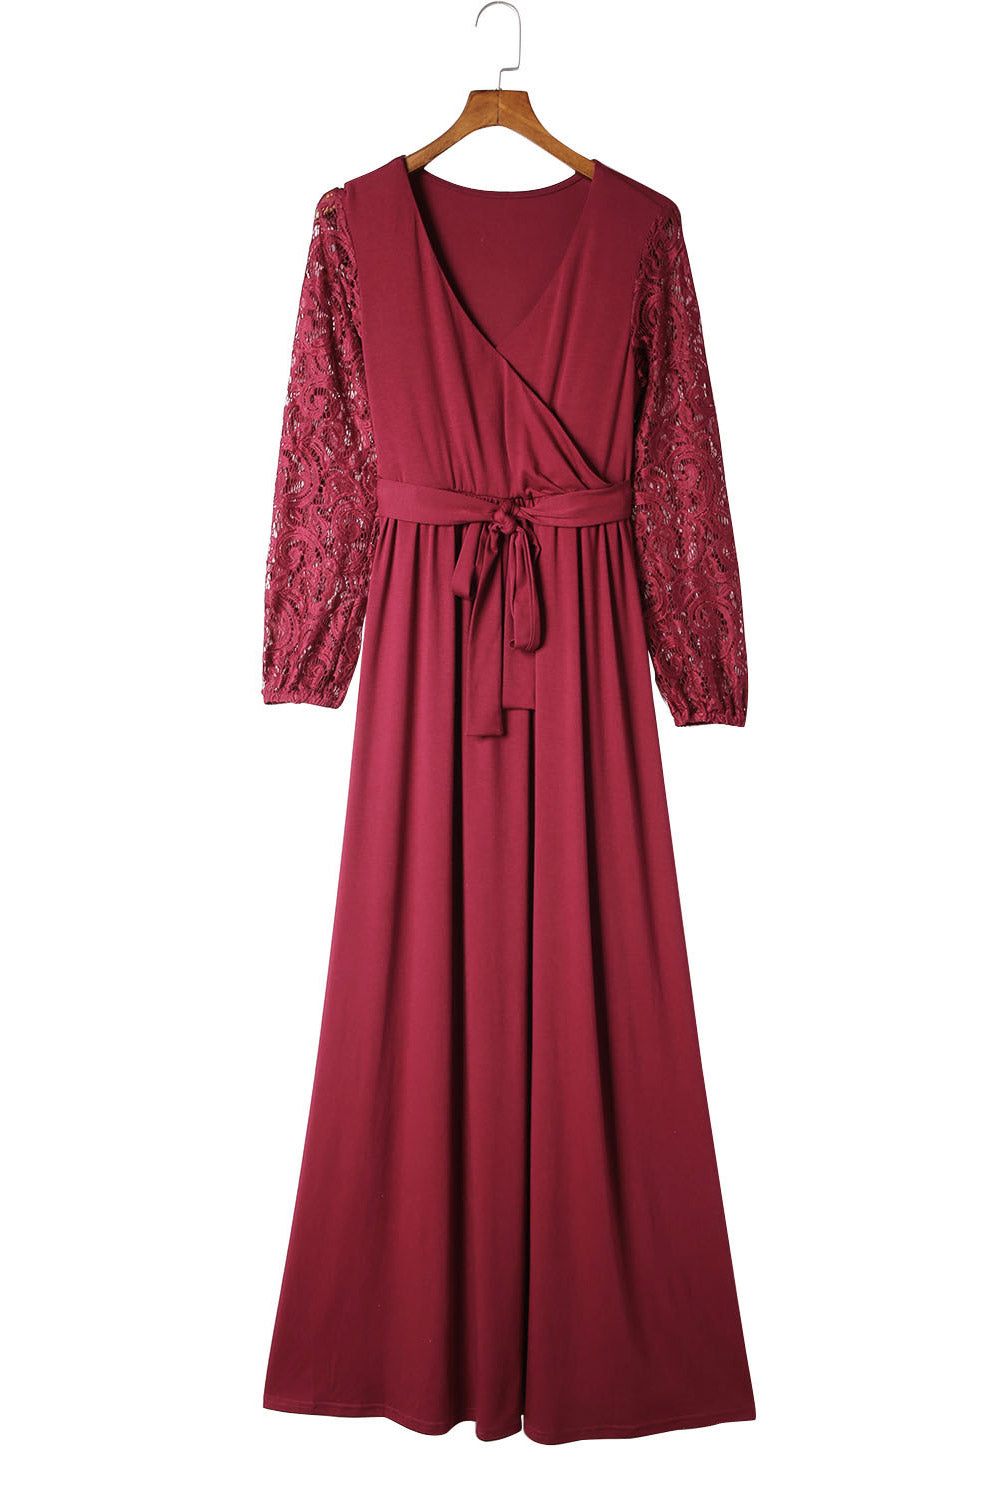 Red Lace Sleeve Faux Wrap Belted Maxi Dress Maxi Dresses JT's Designer Fashion